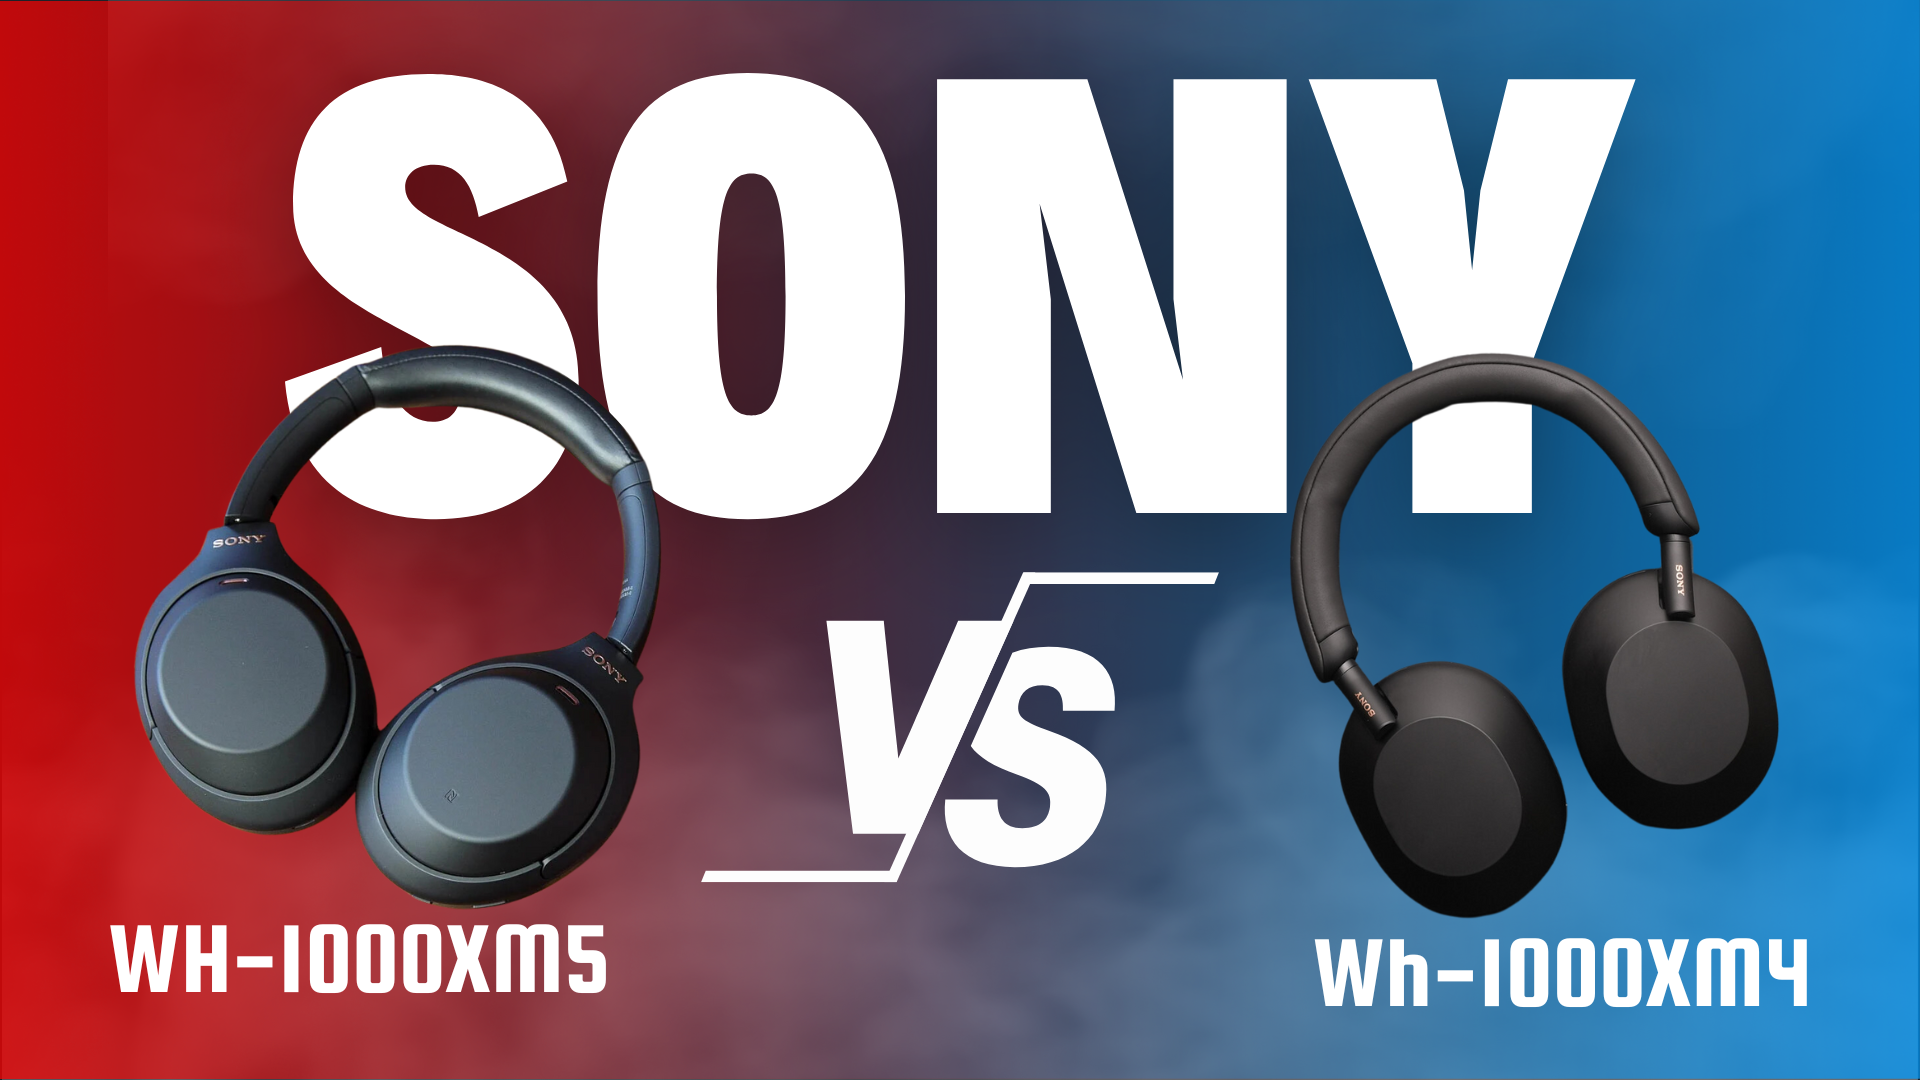 Sony WH-1000XM4 vs Soundpeats A6: What is the difference?